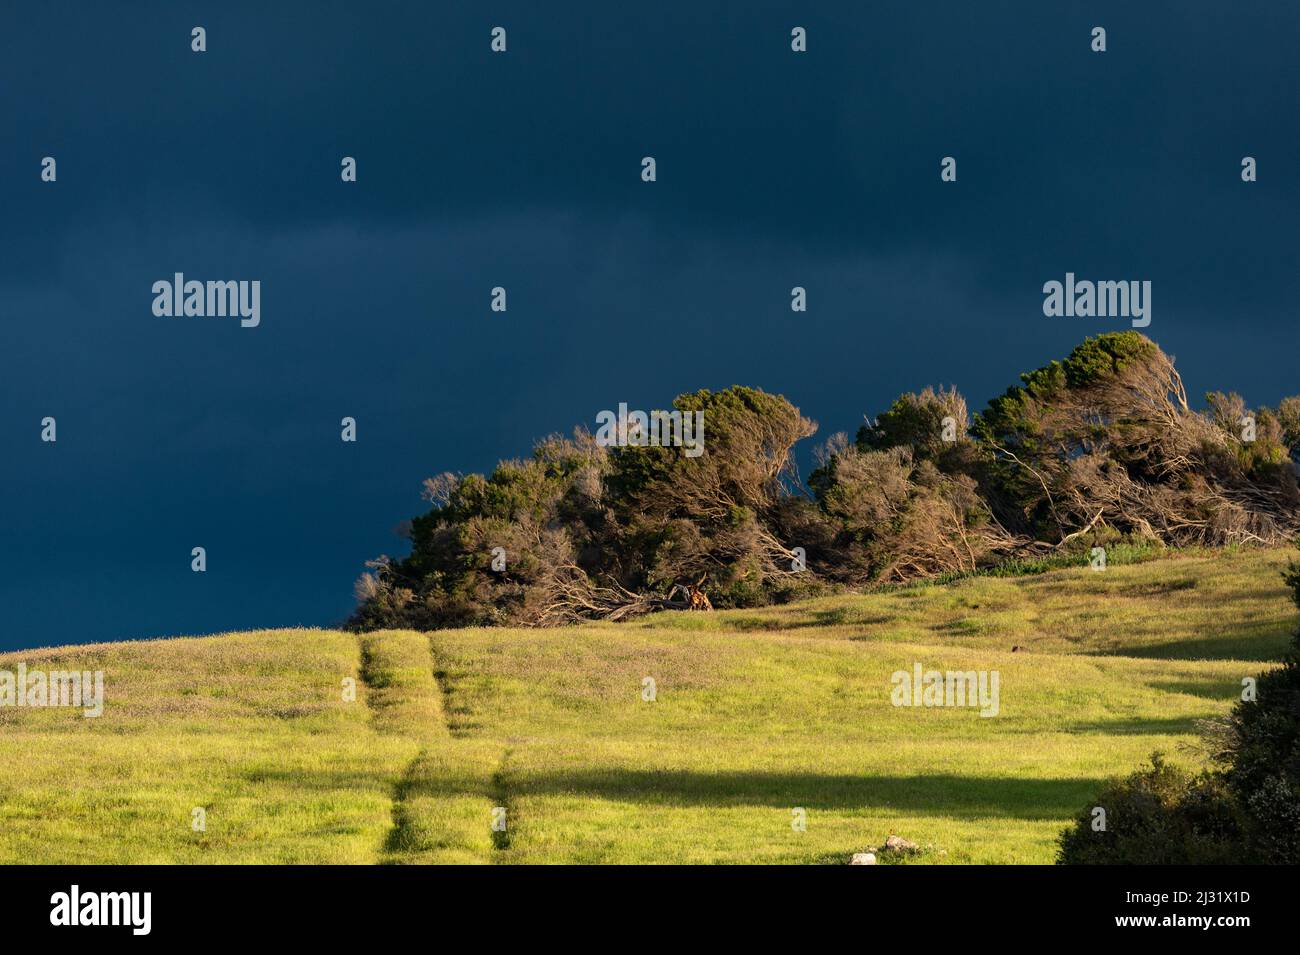 Shrubs and trees with dark clouds in the background, Tasmania, Australia Stock Photo